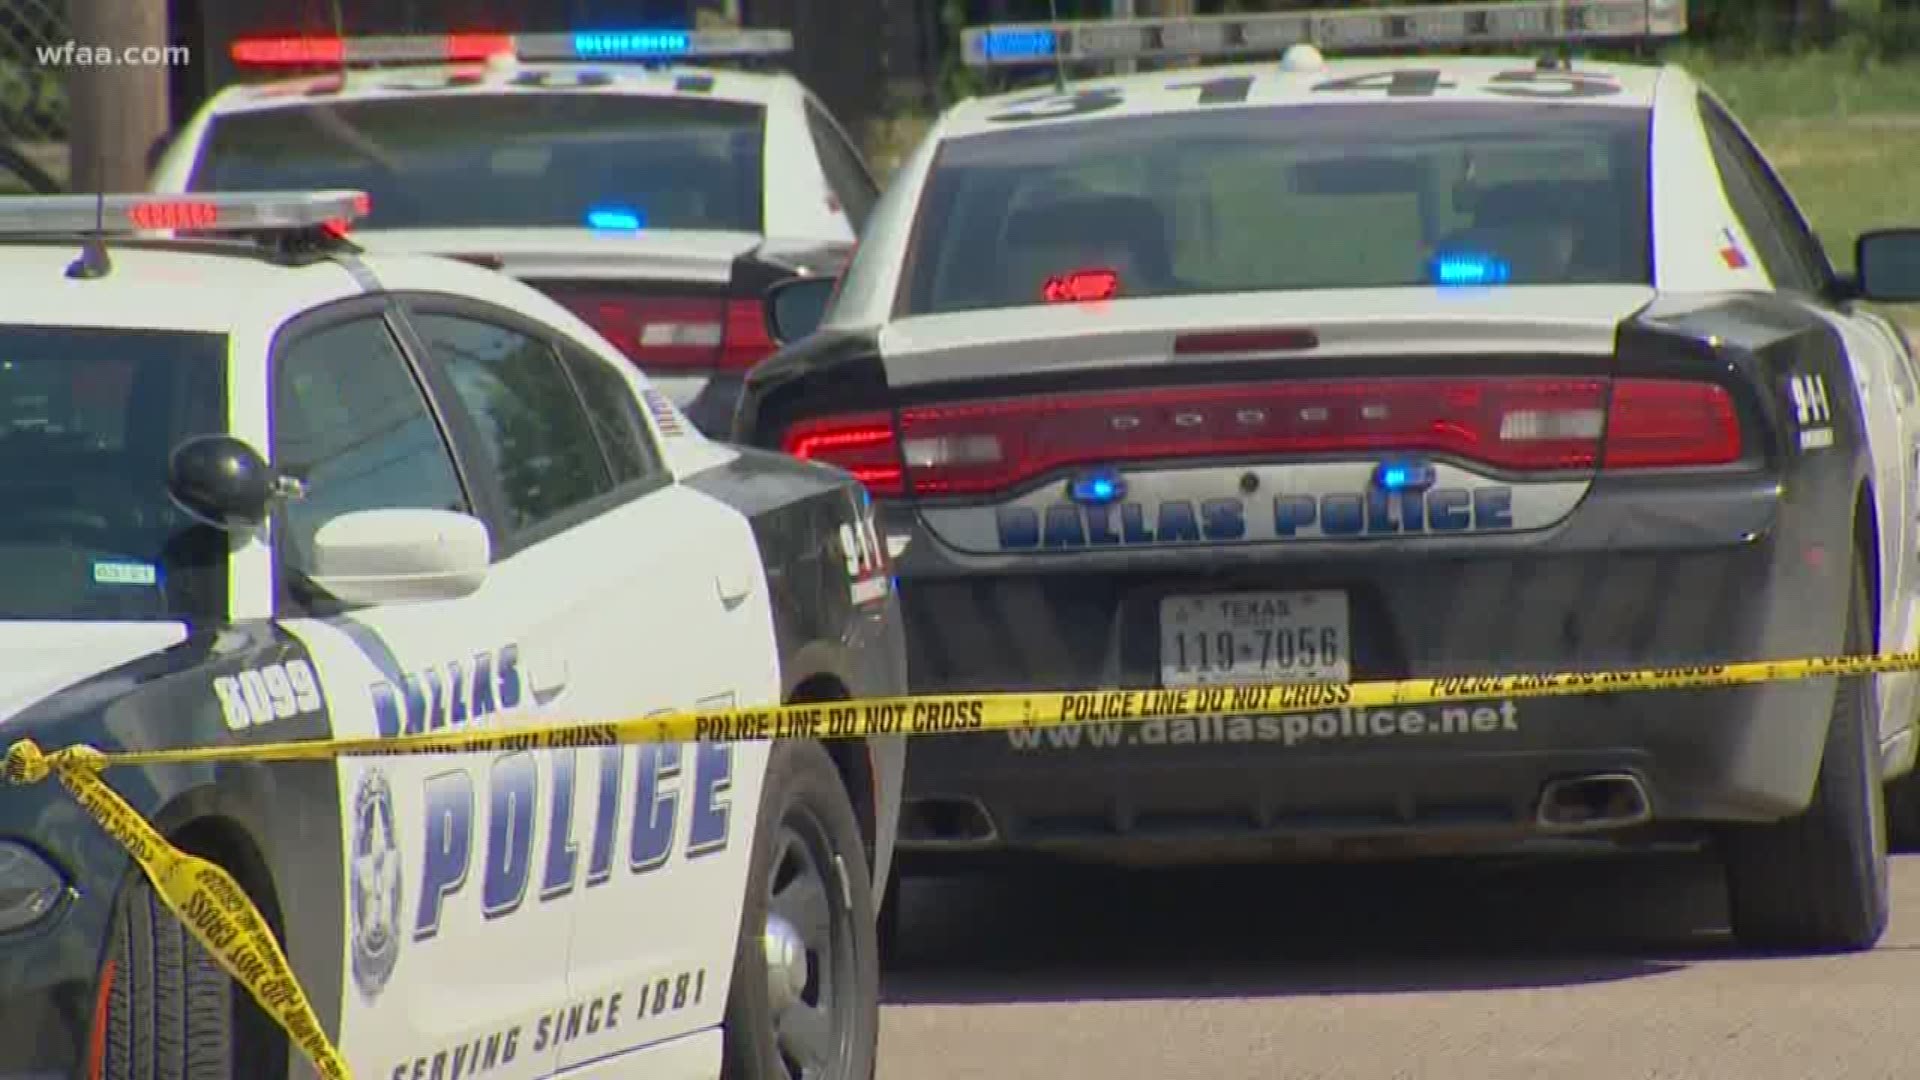 Police shot and killed a suspect after he shot at officers Saturday.